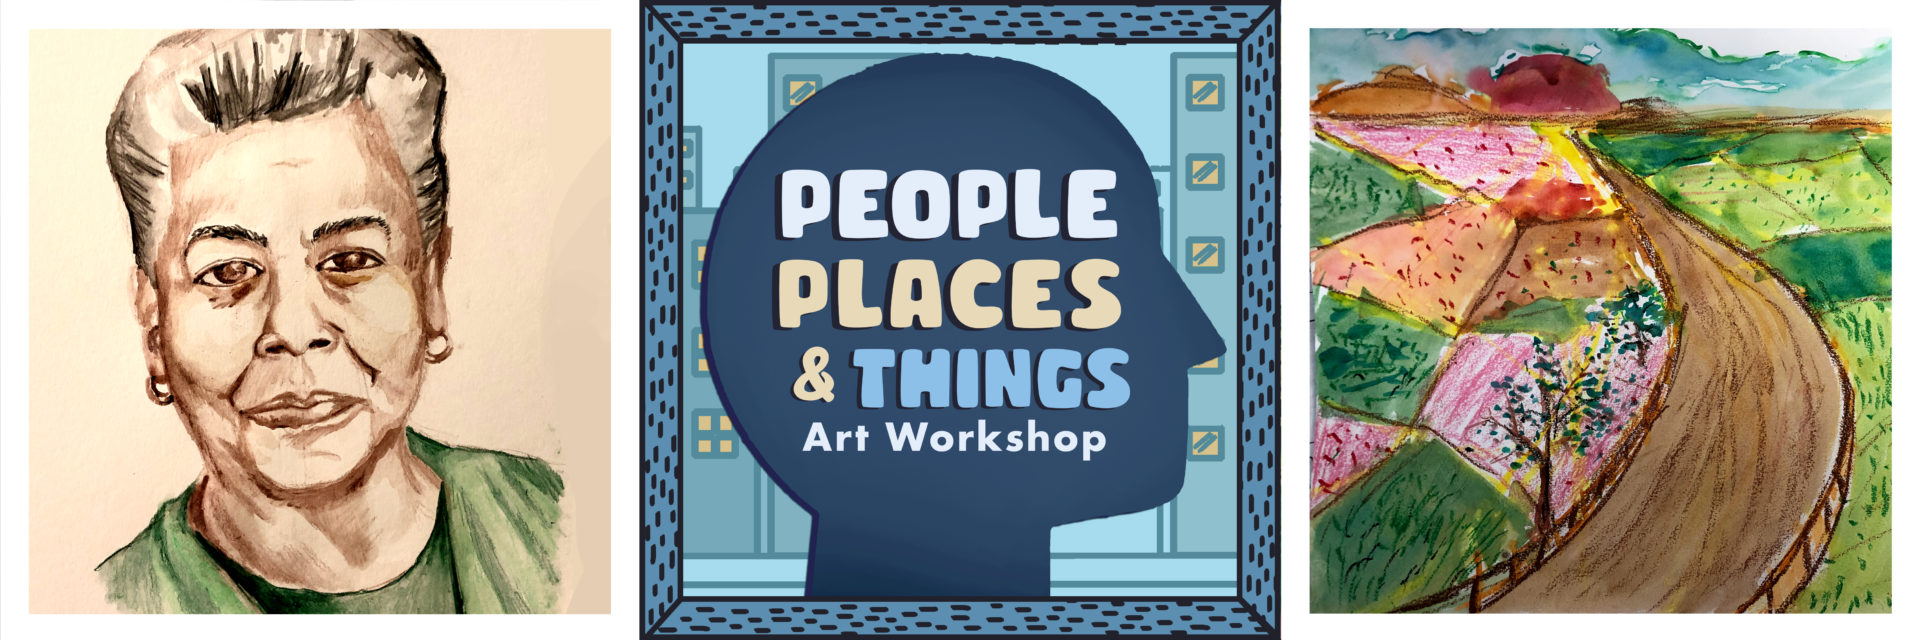 People, Places, and Things Art Workshop title graphic in the center. Watercolor portrait of Maya Angelou on the left. Vibrant watercolor landscape painting on the right.